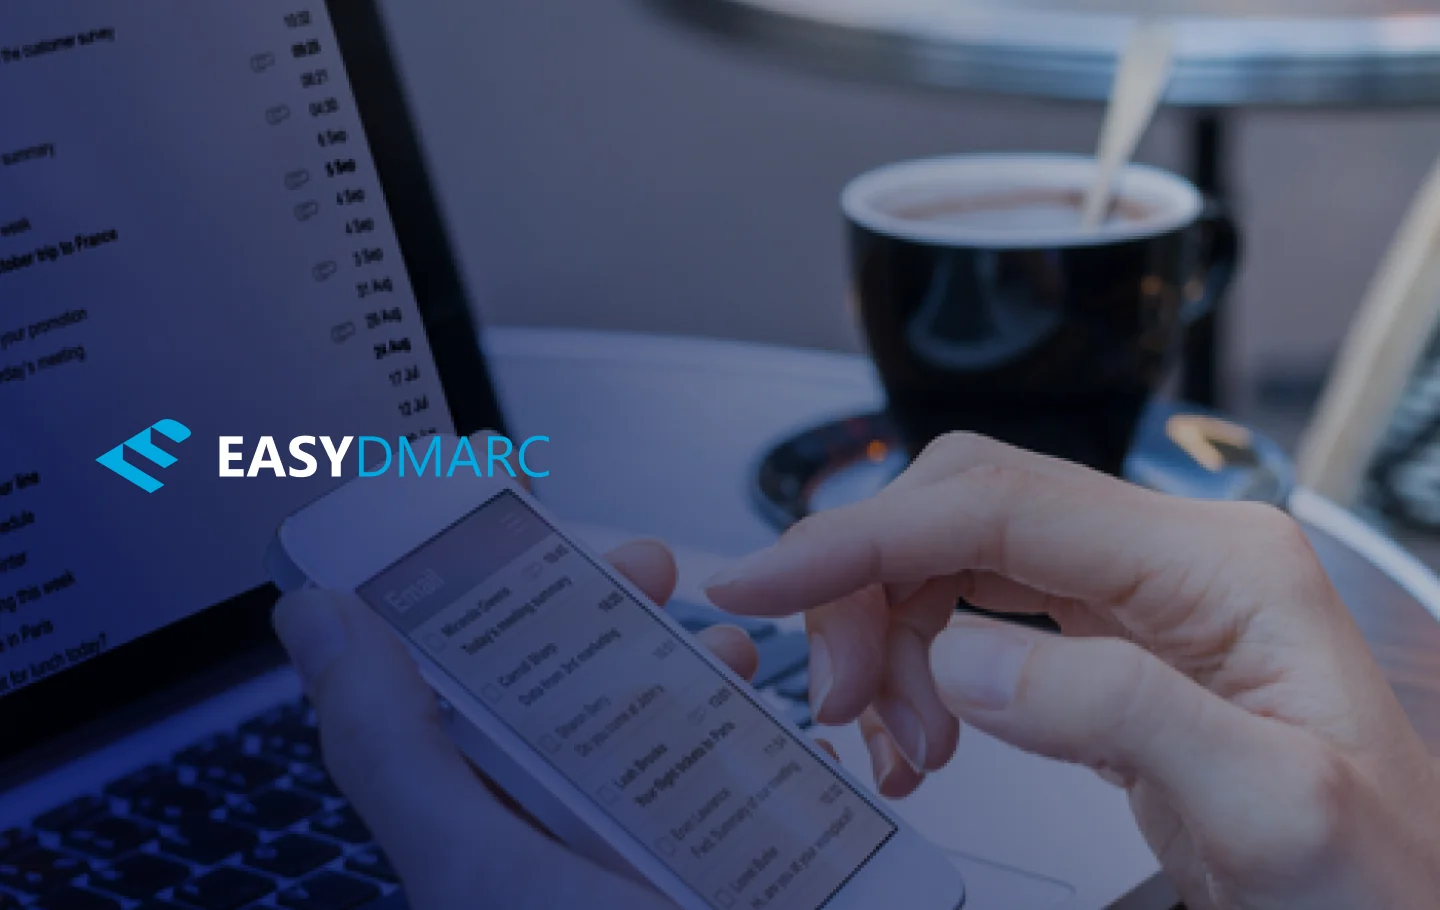 A laptop on a desk, cup on it's right side and mobile  phone with EasyDMARC logo on the picture